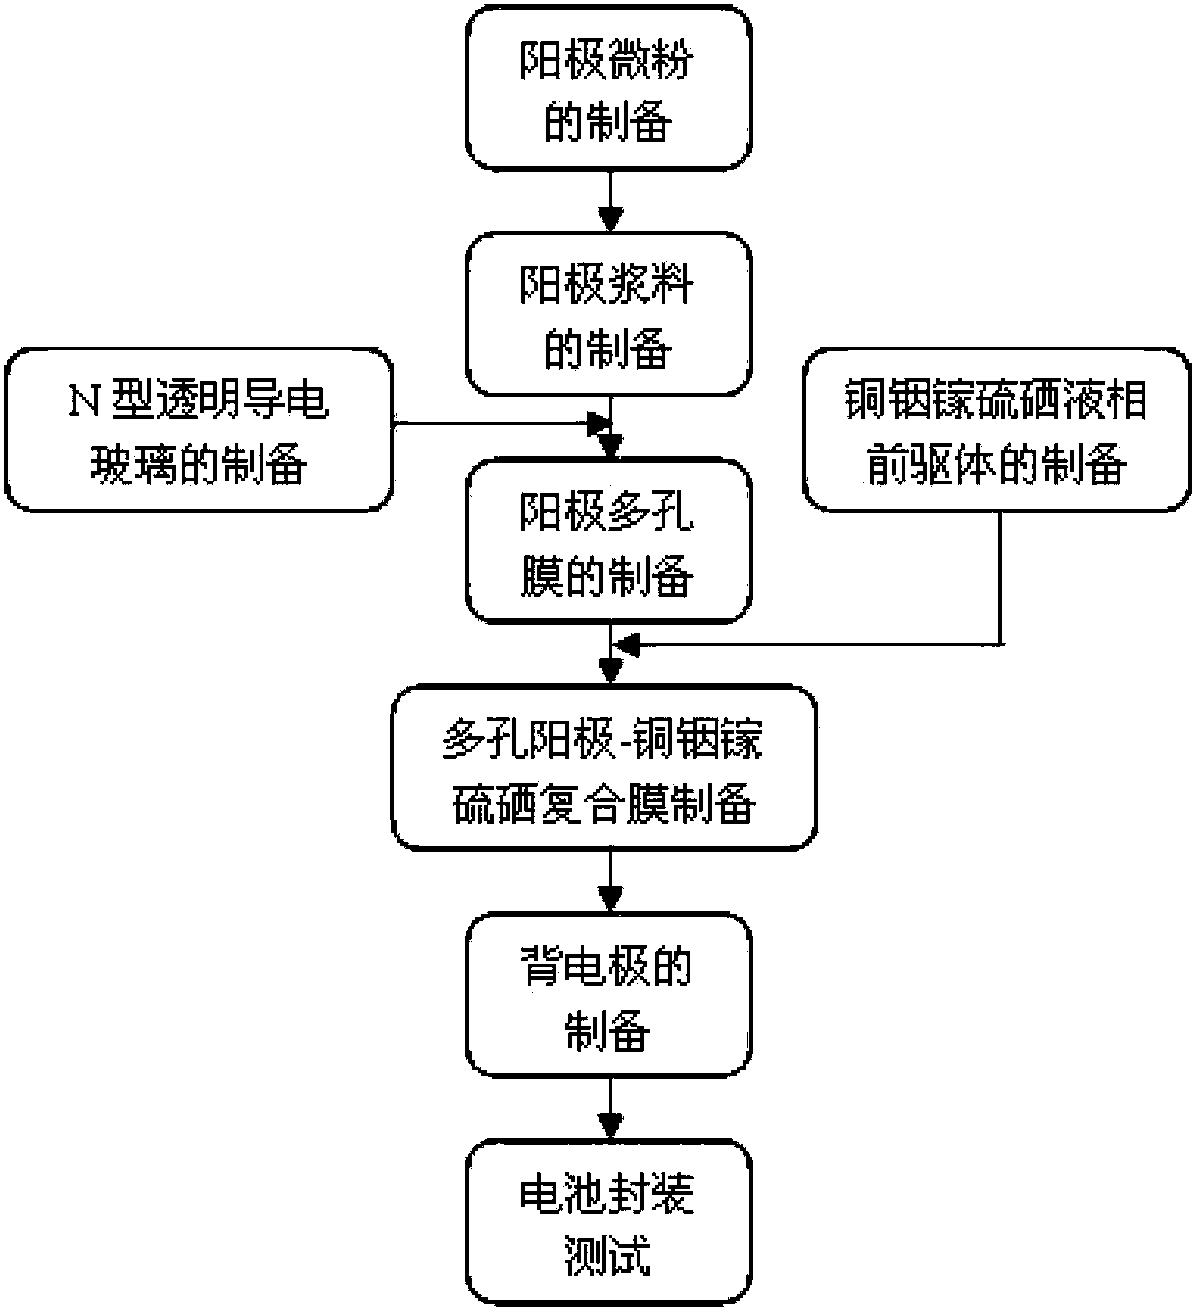 Cu-Im-Ga-S-Se-sensitized semiconductor anode solar cell and preparation method thereof